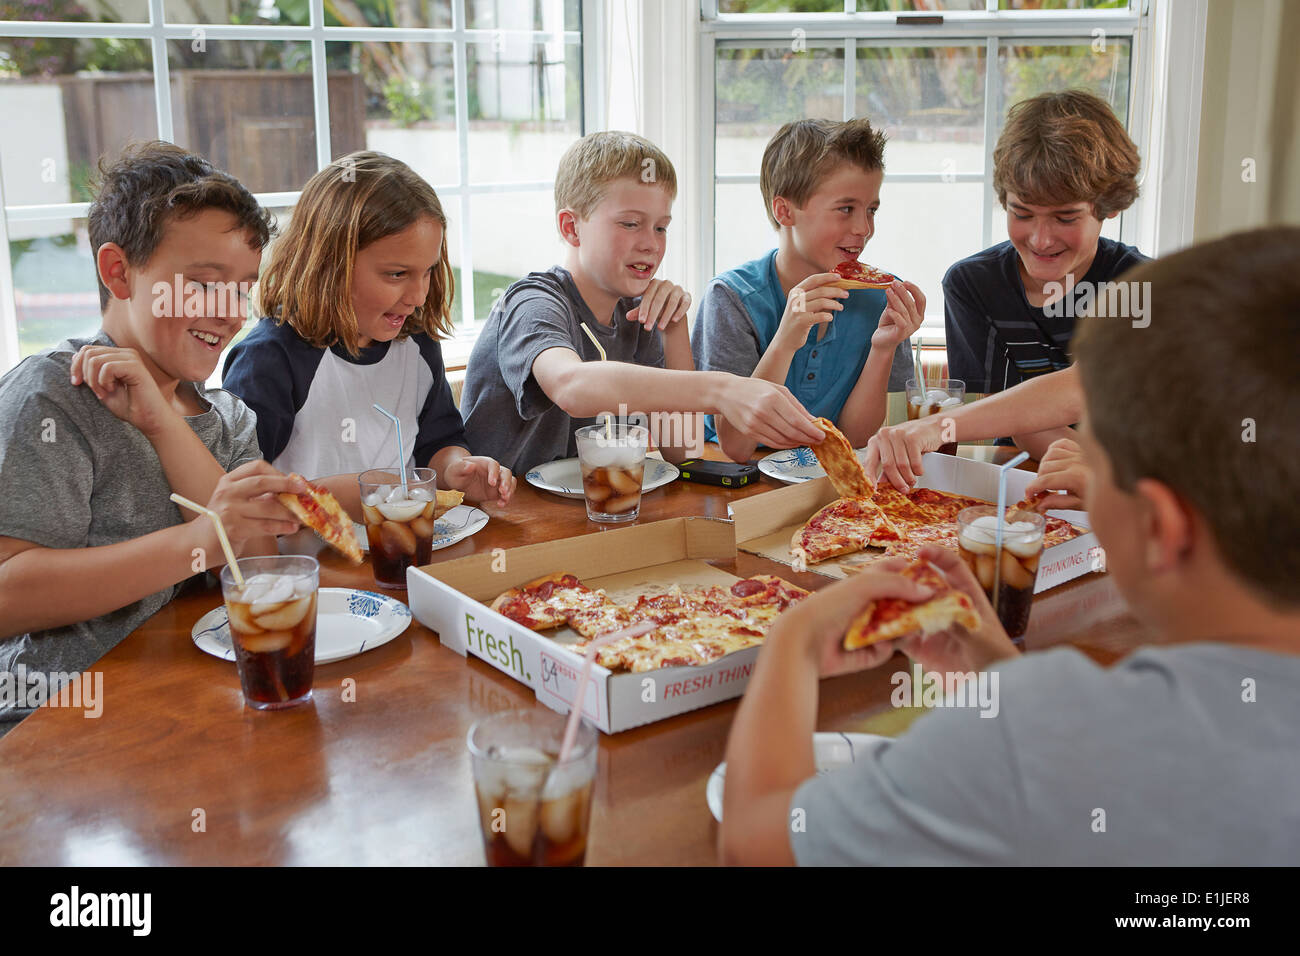 Group of boys sharing pizza Stock Photo